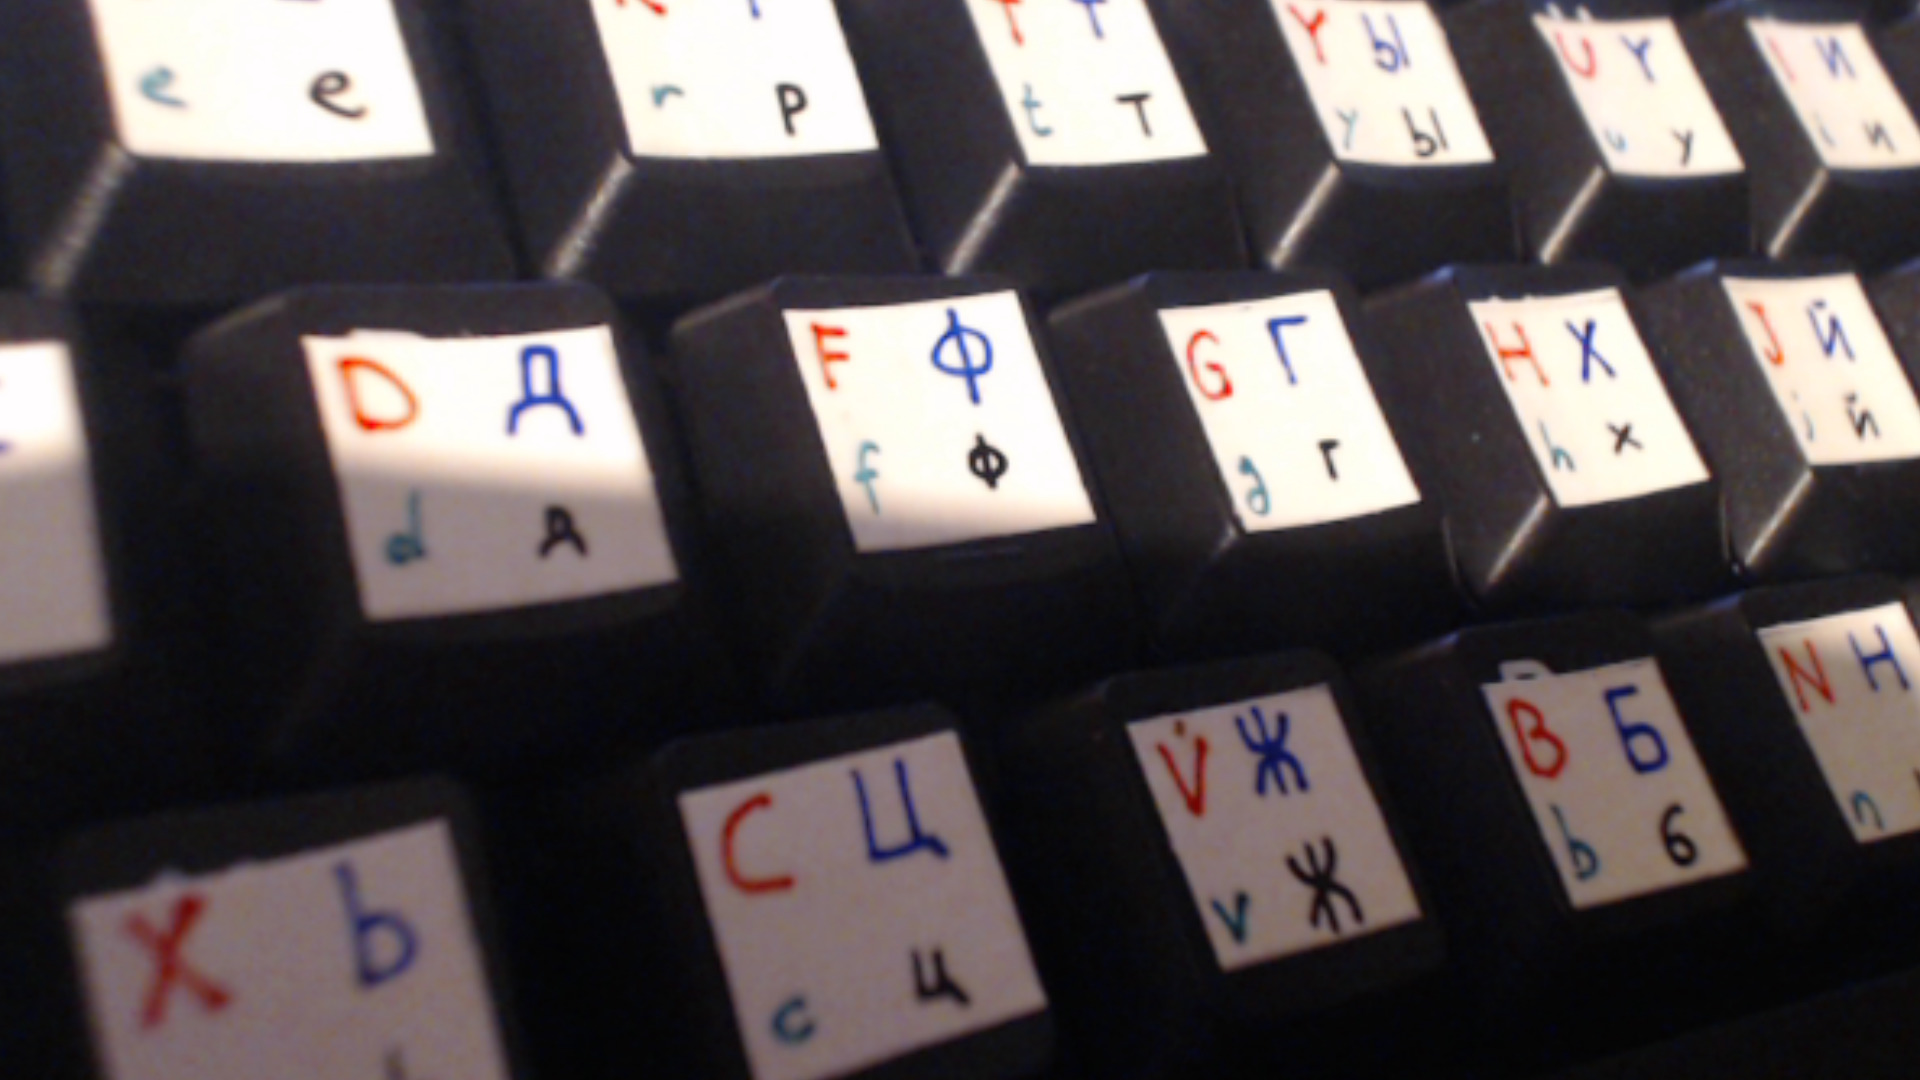 My hand-made Russian (phonetic) keyboards, image 12 of 14